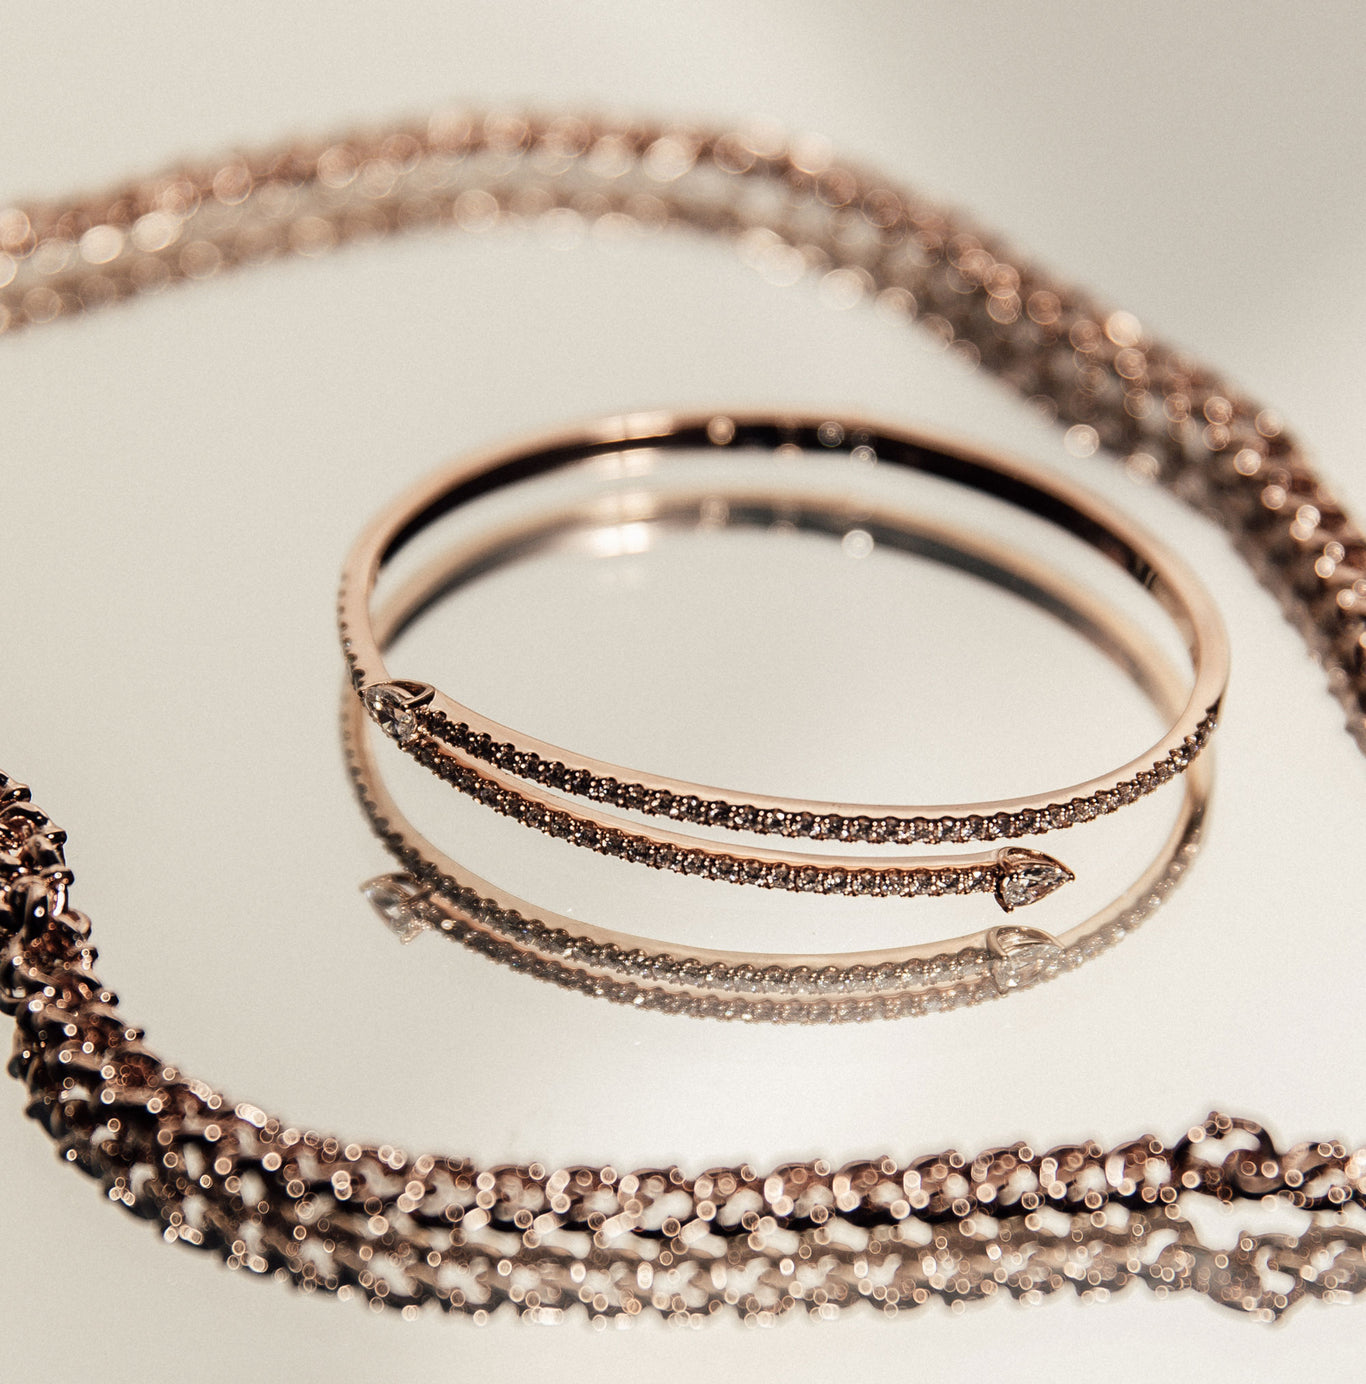 The Neptune Bangle shown next to the Tag Necklace.